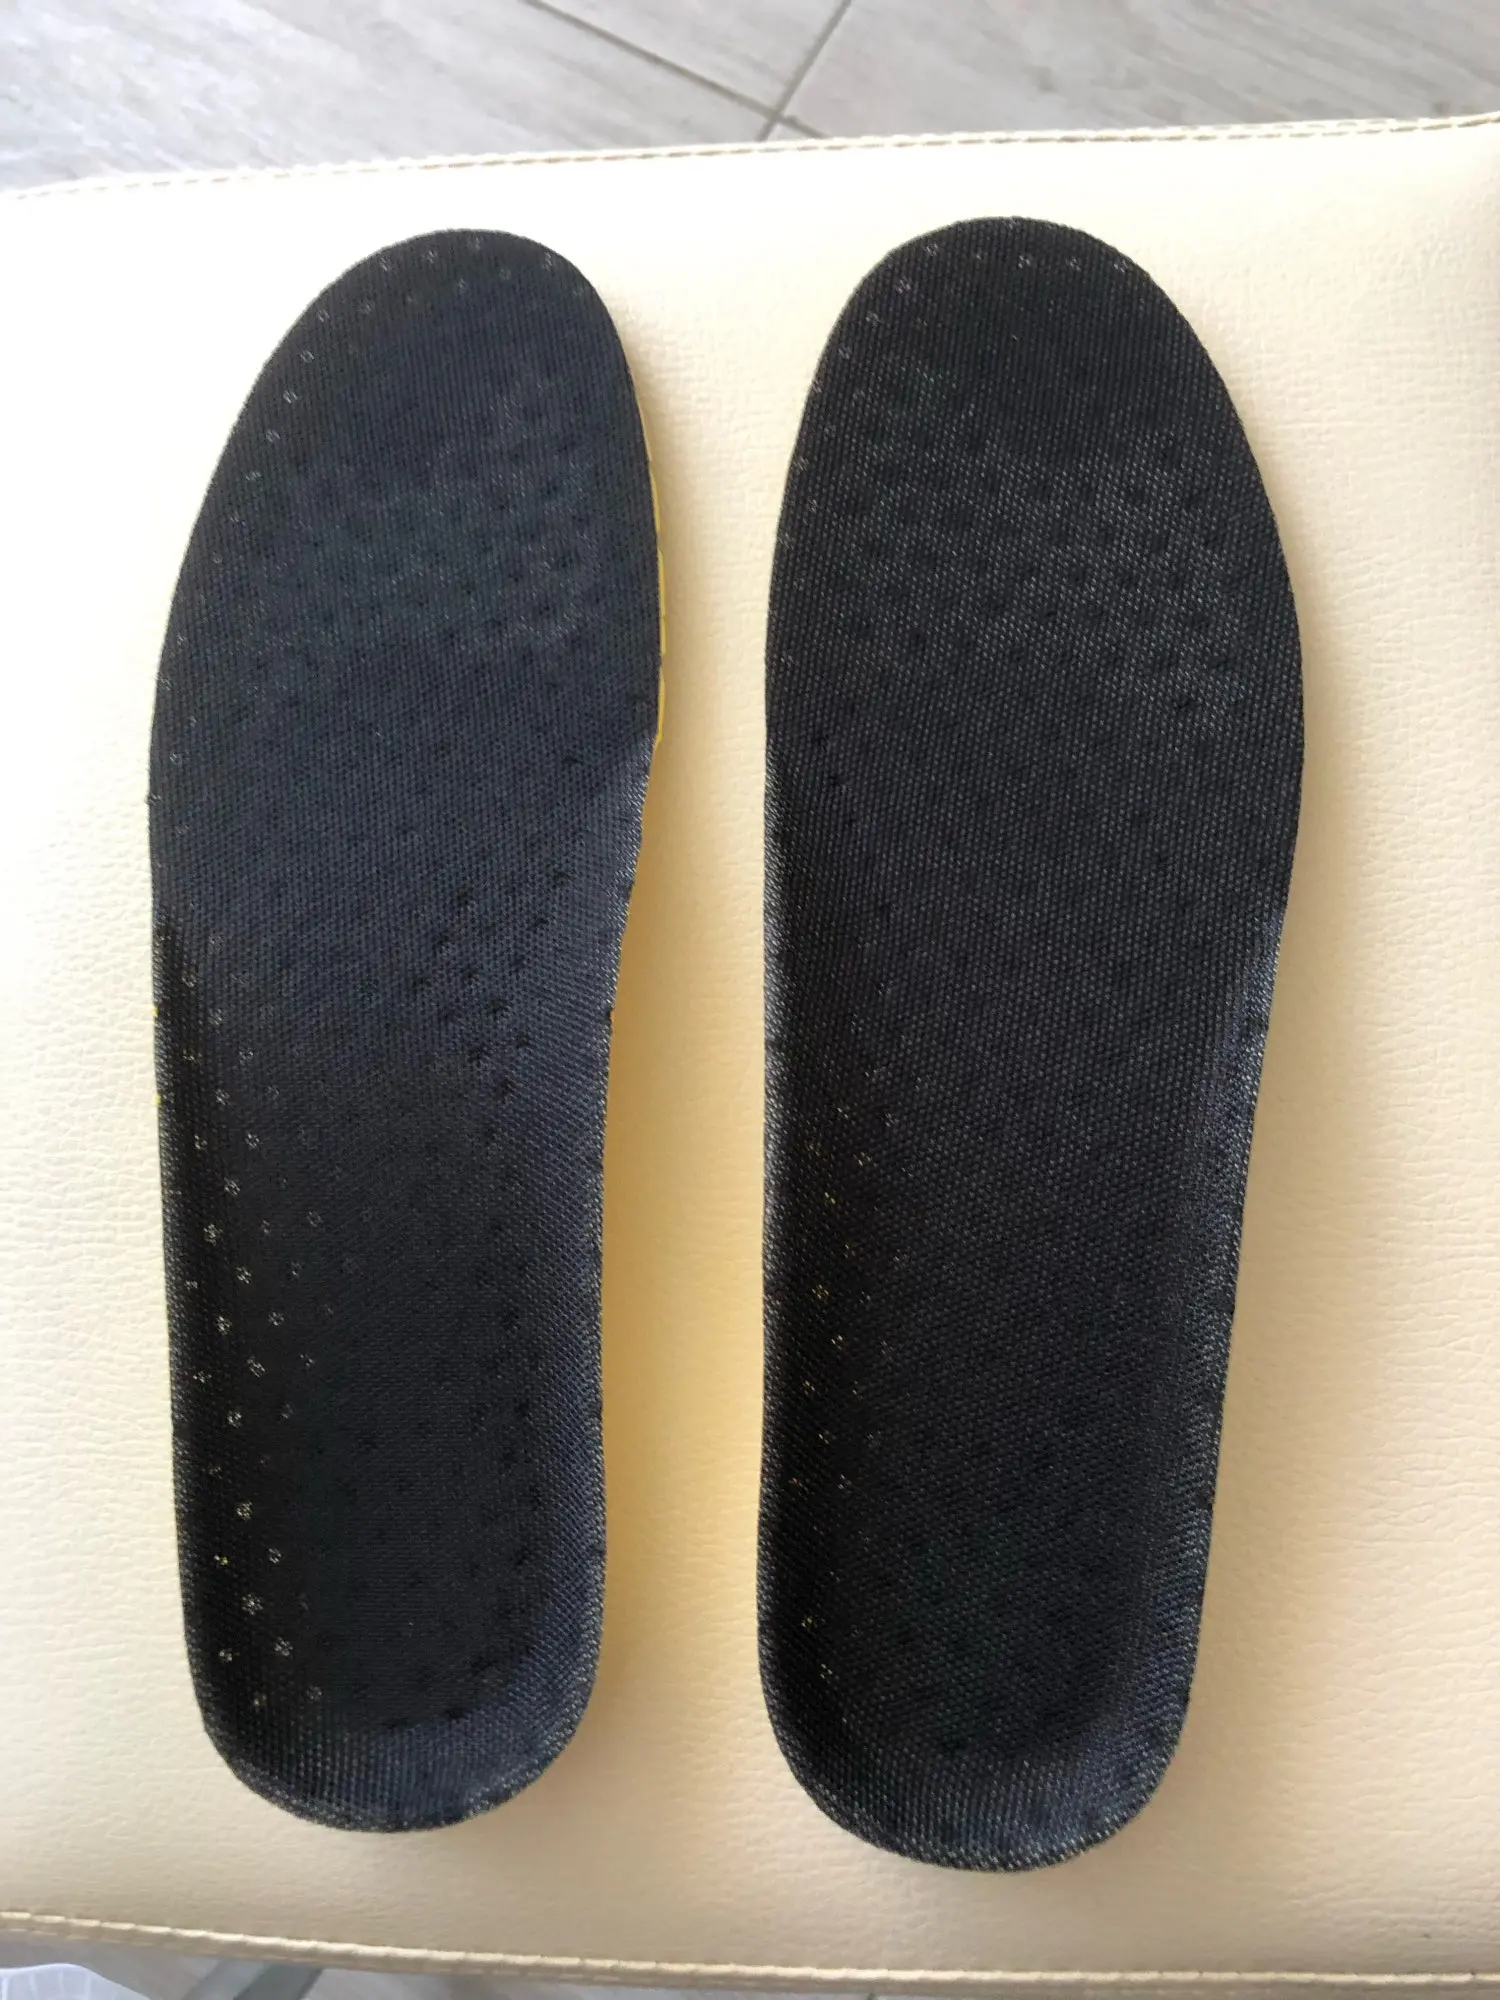 Bangni Insoles Orthopedic Memory Foam Sport Support Insert Woman Men Shoes Feet Soles Pad Orthotic Breathable Running Cushion